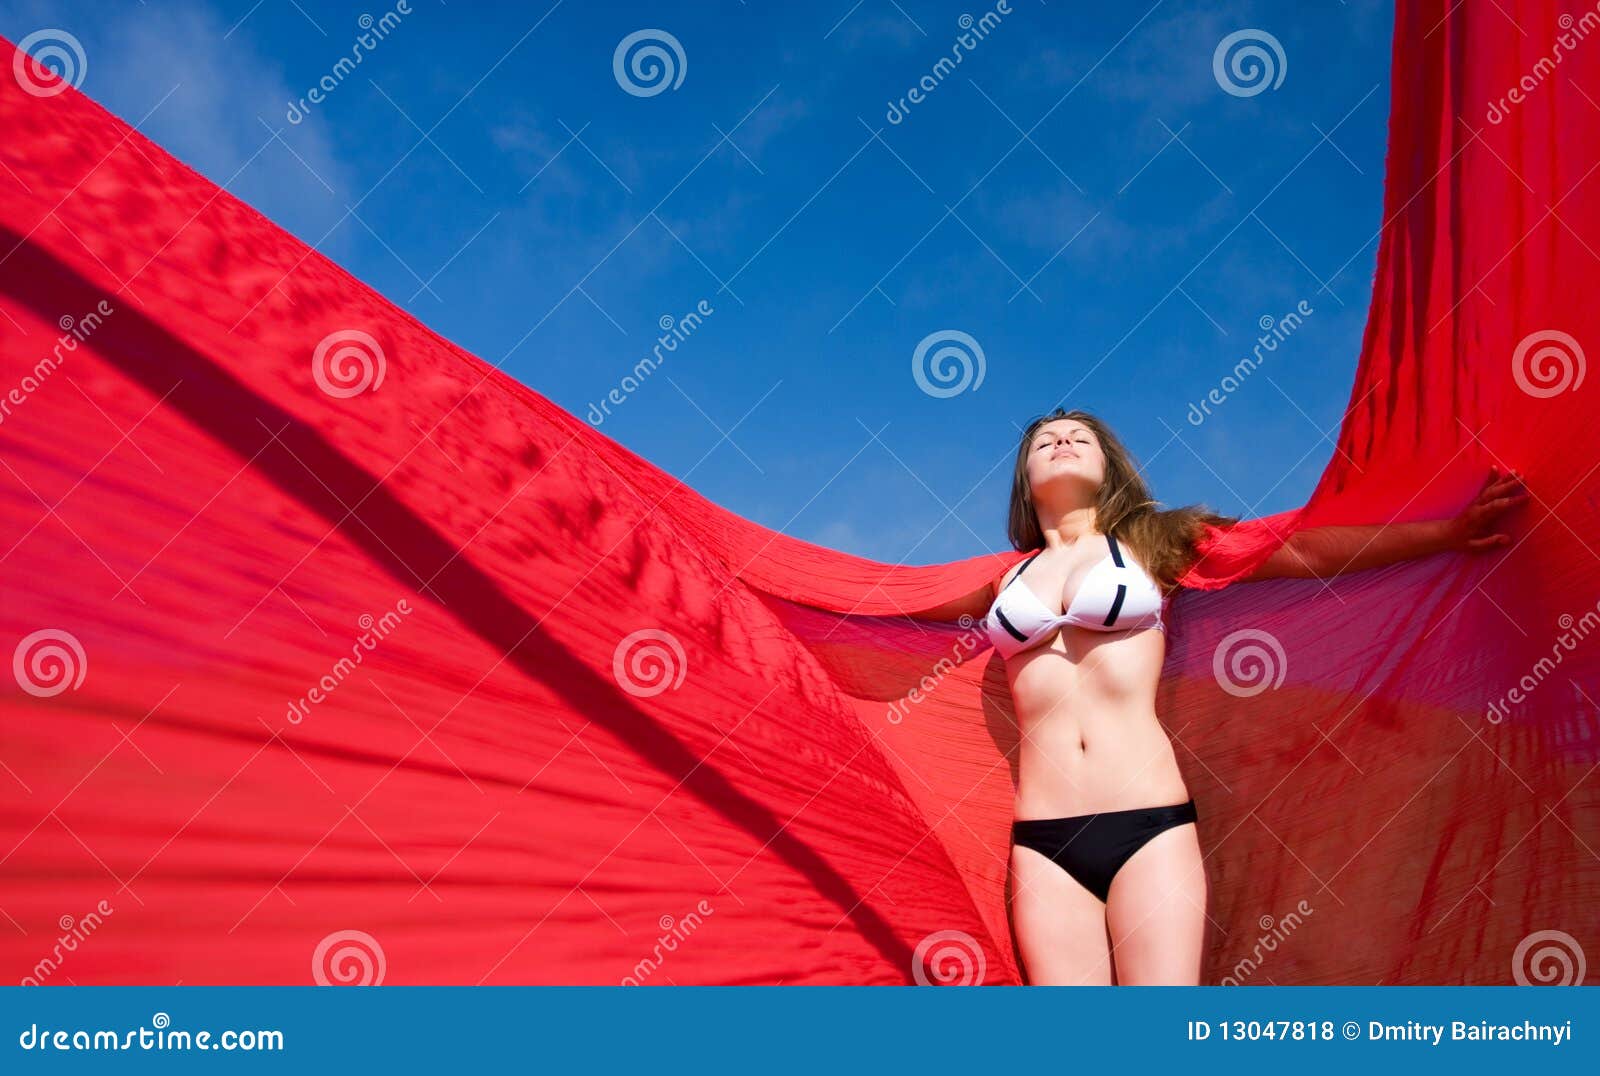 woman with red material and nature